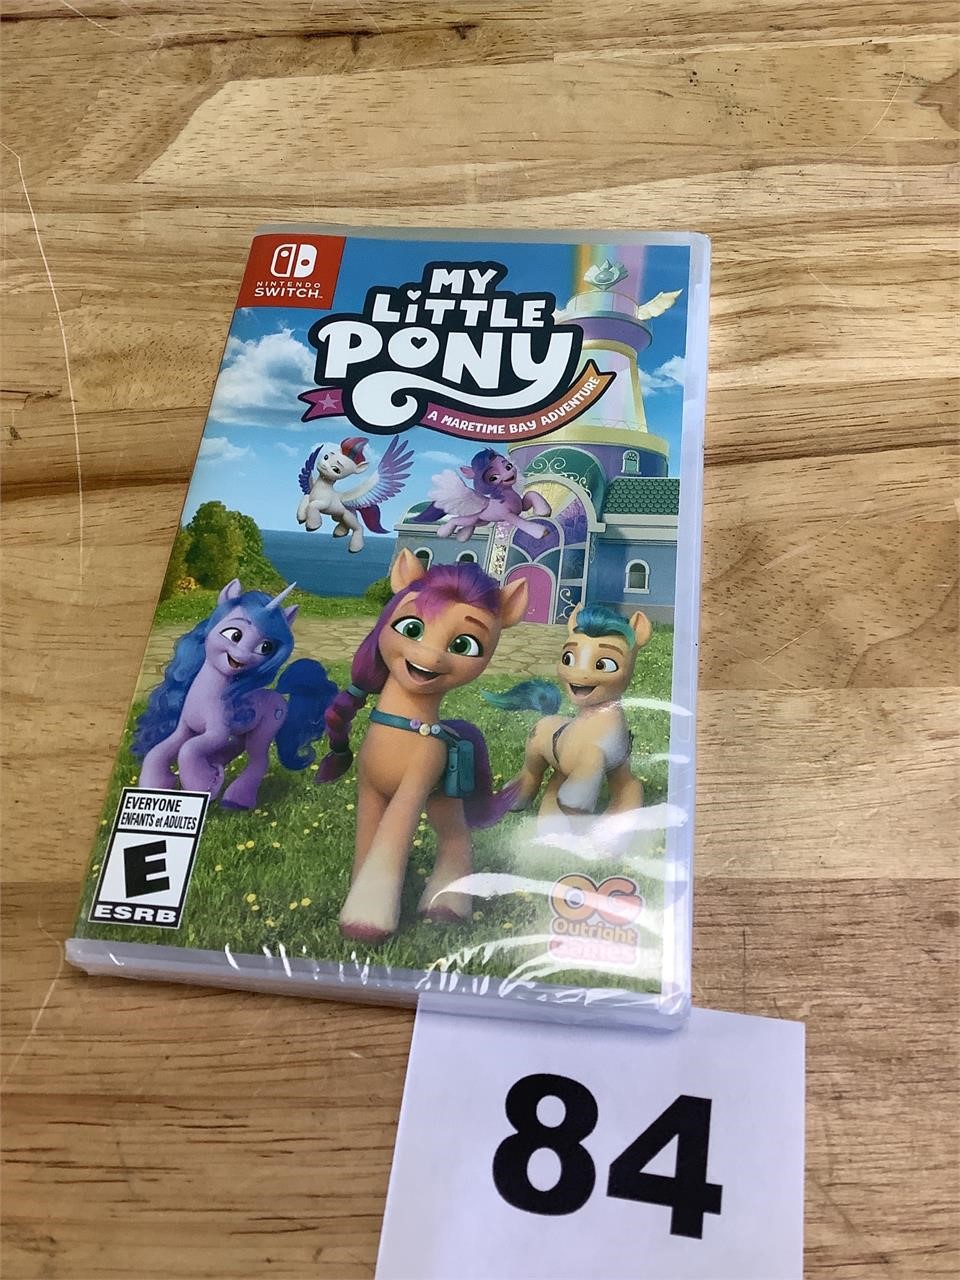 My Little Pony Game for Nintendo Switch